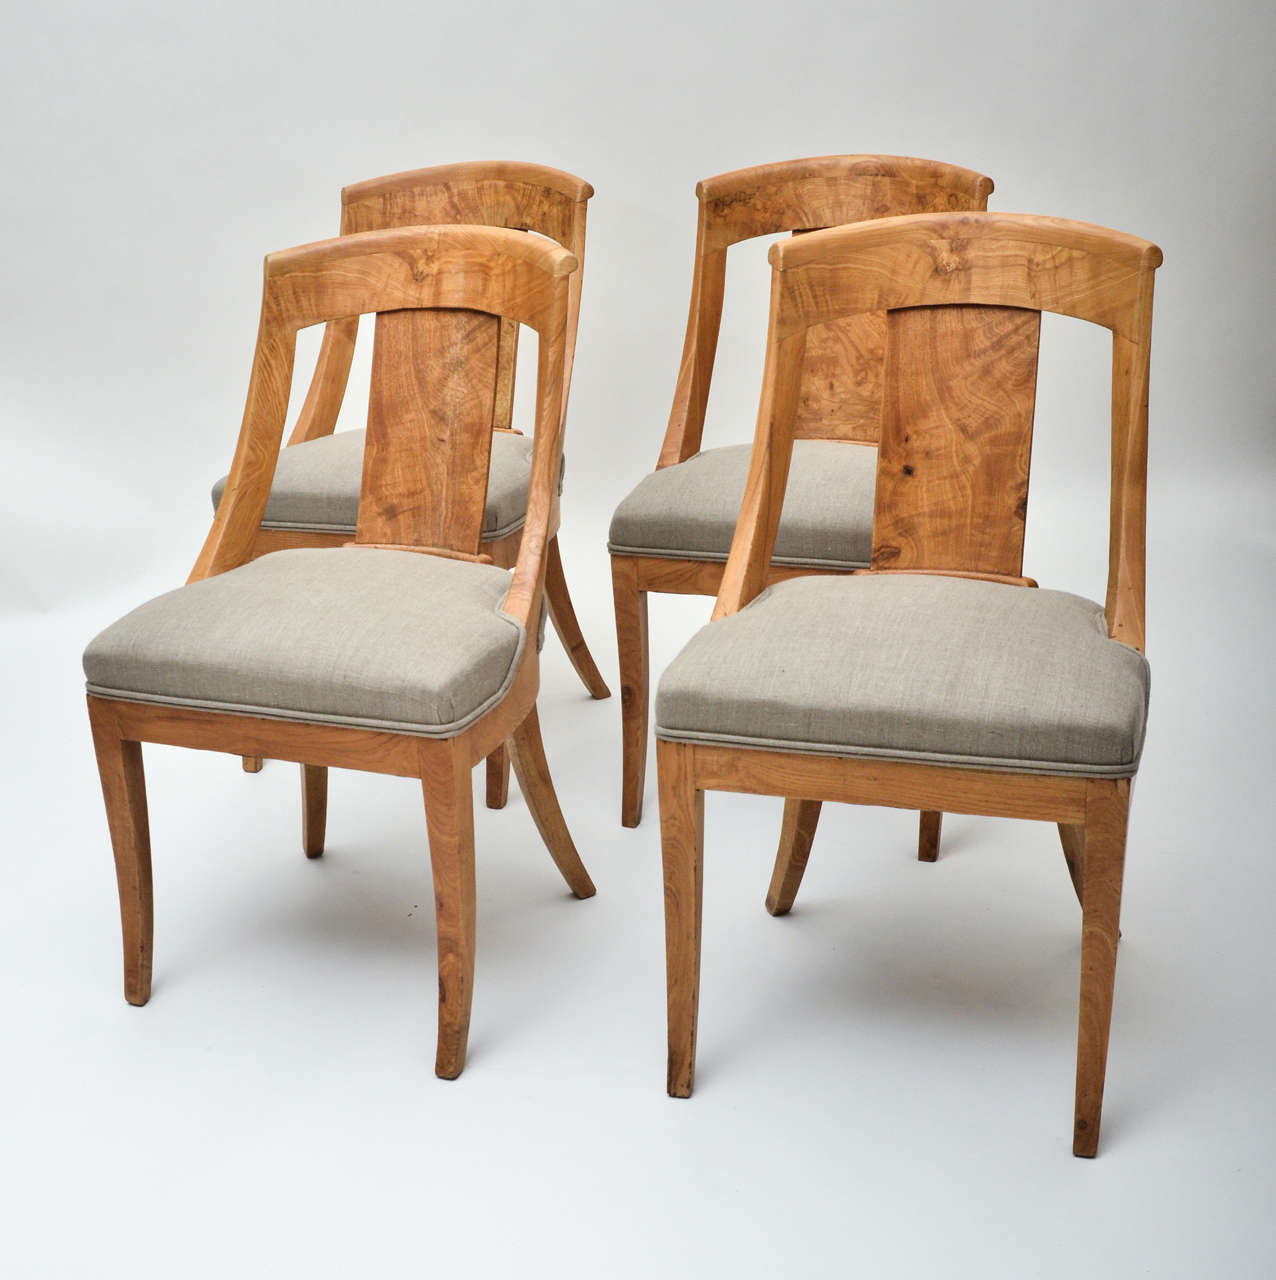 A set of four early 19th century Biedermeier chairs in elmwood, upholstered in cream calico.